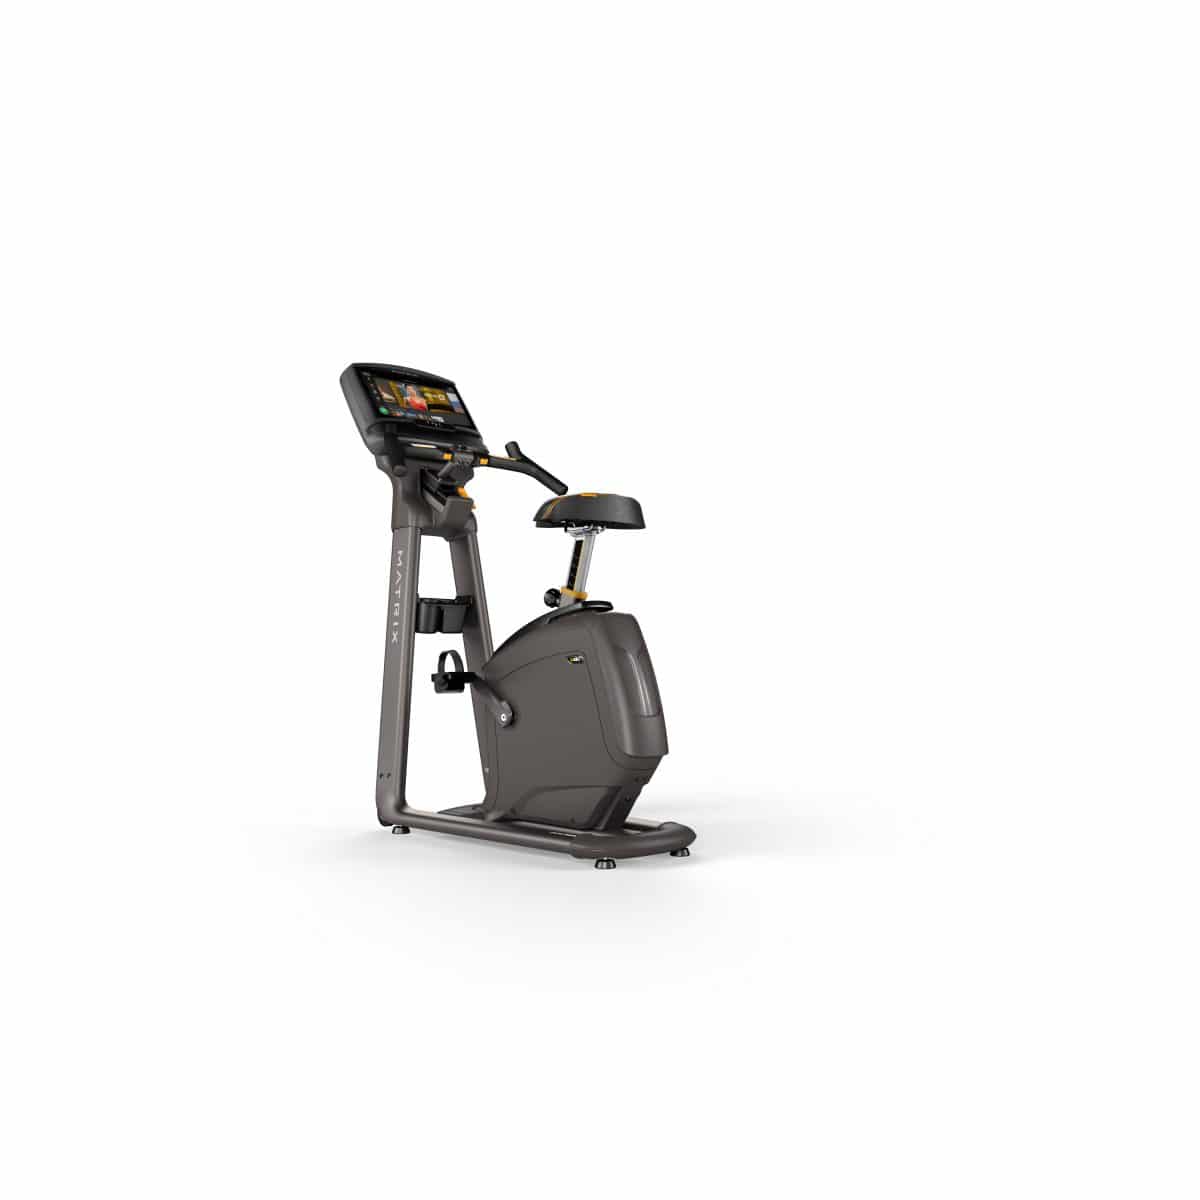 A stationary exercise bike on a white background.